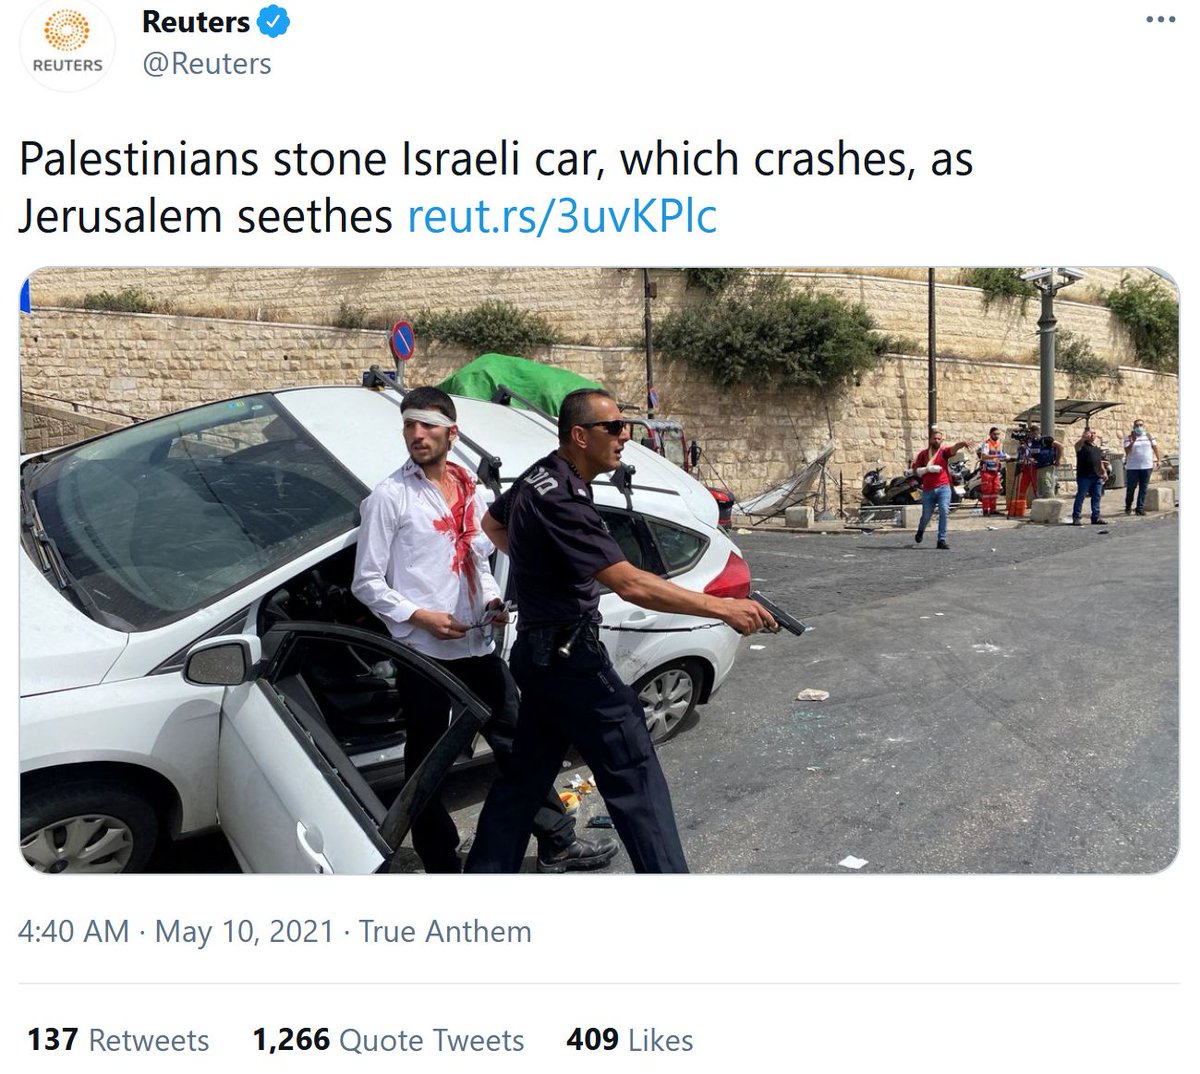 OK, so this video is going around under the Reuters headline “Palestinians stone Israeli car, which crashes”. This incident occurred near the Lion's Gate in Jerusalem. I wanted to see how much footage I can find of the event and provide a fuller picture of what happened.